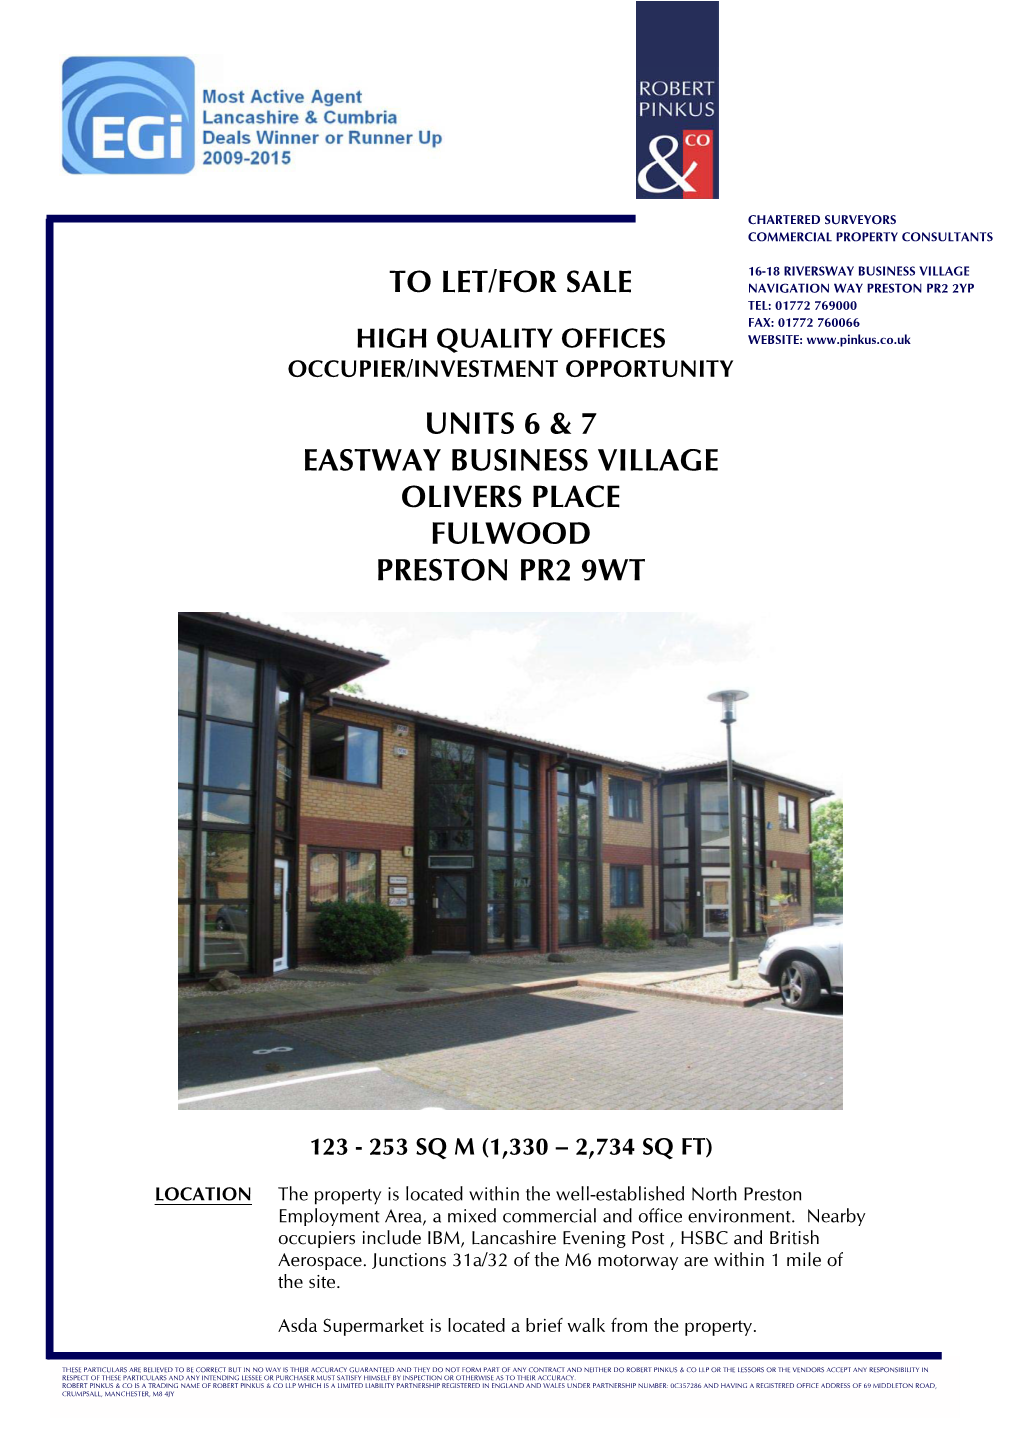 To Let/For Sale Units 6 & 7 Eastway Business Village